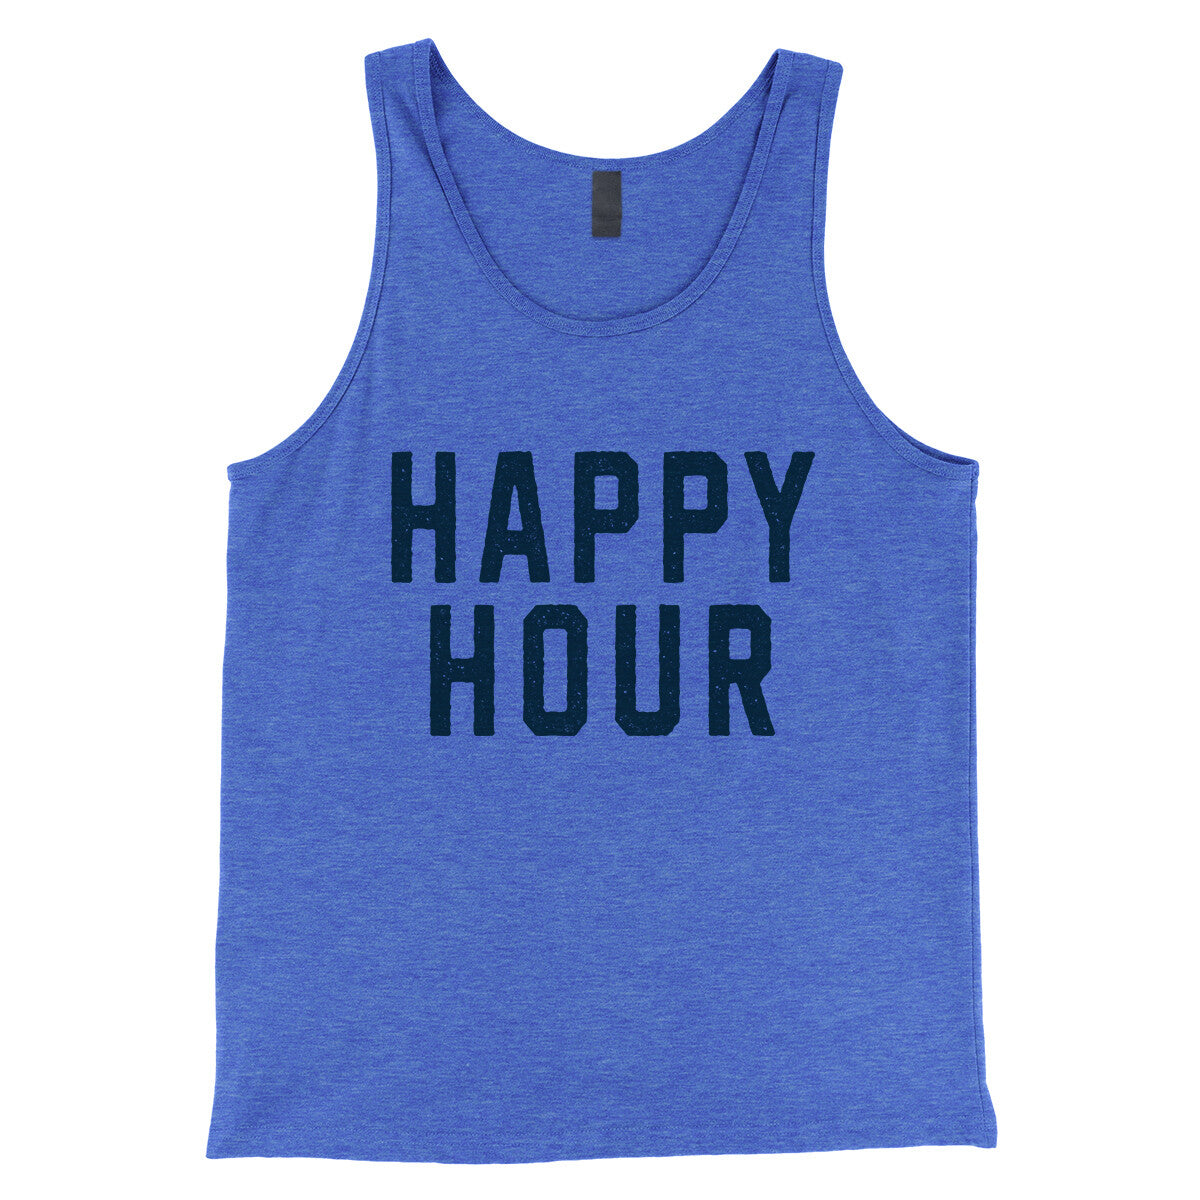 Happy Hour in True Royal TriBlend Color